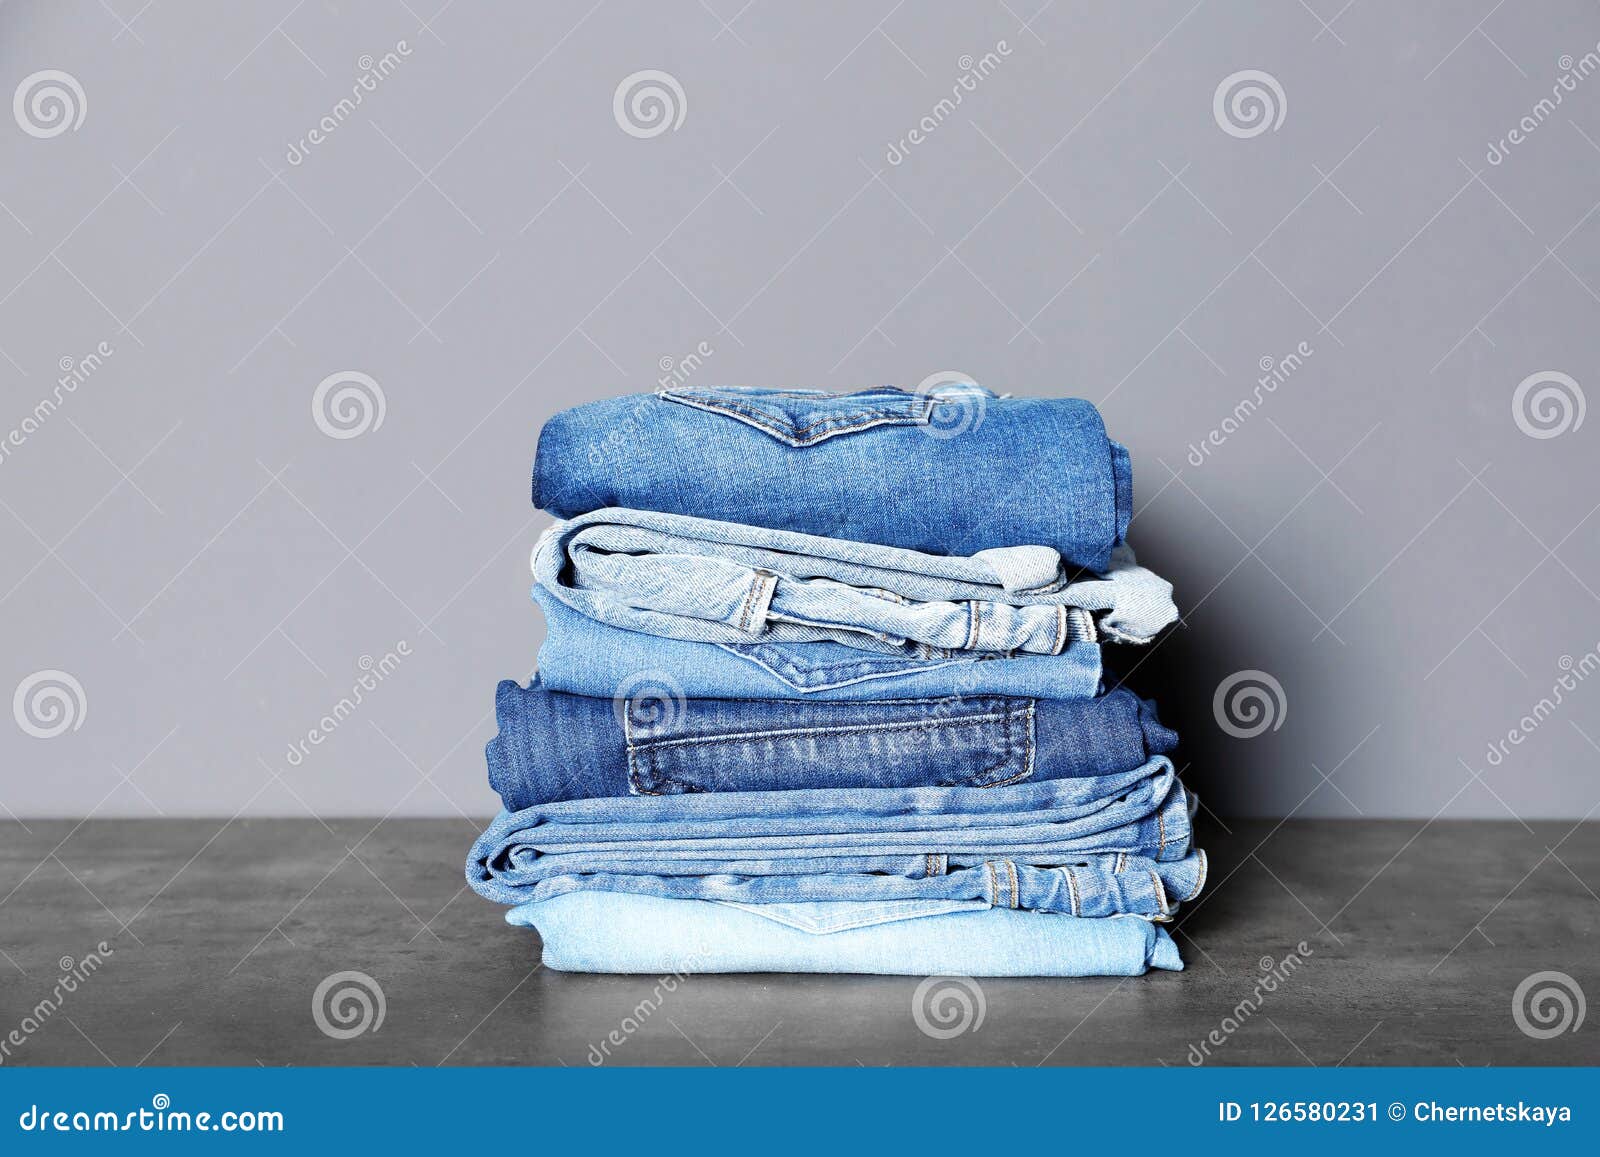 Stack of Different Jeans on Table Stock Image - Image of size ...